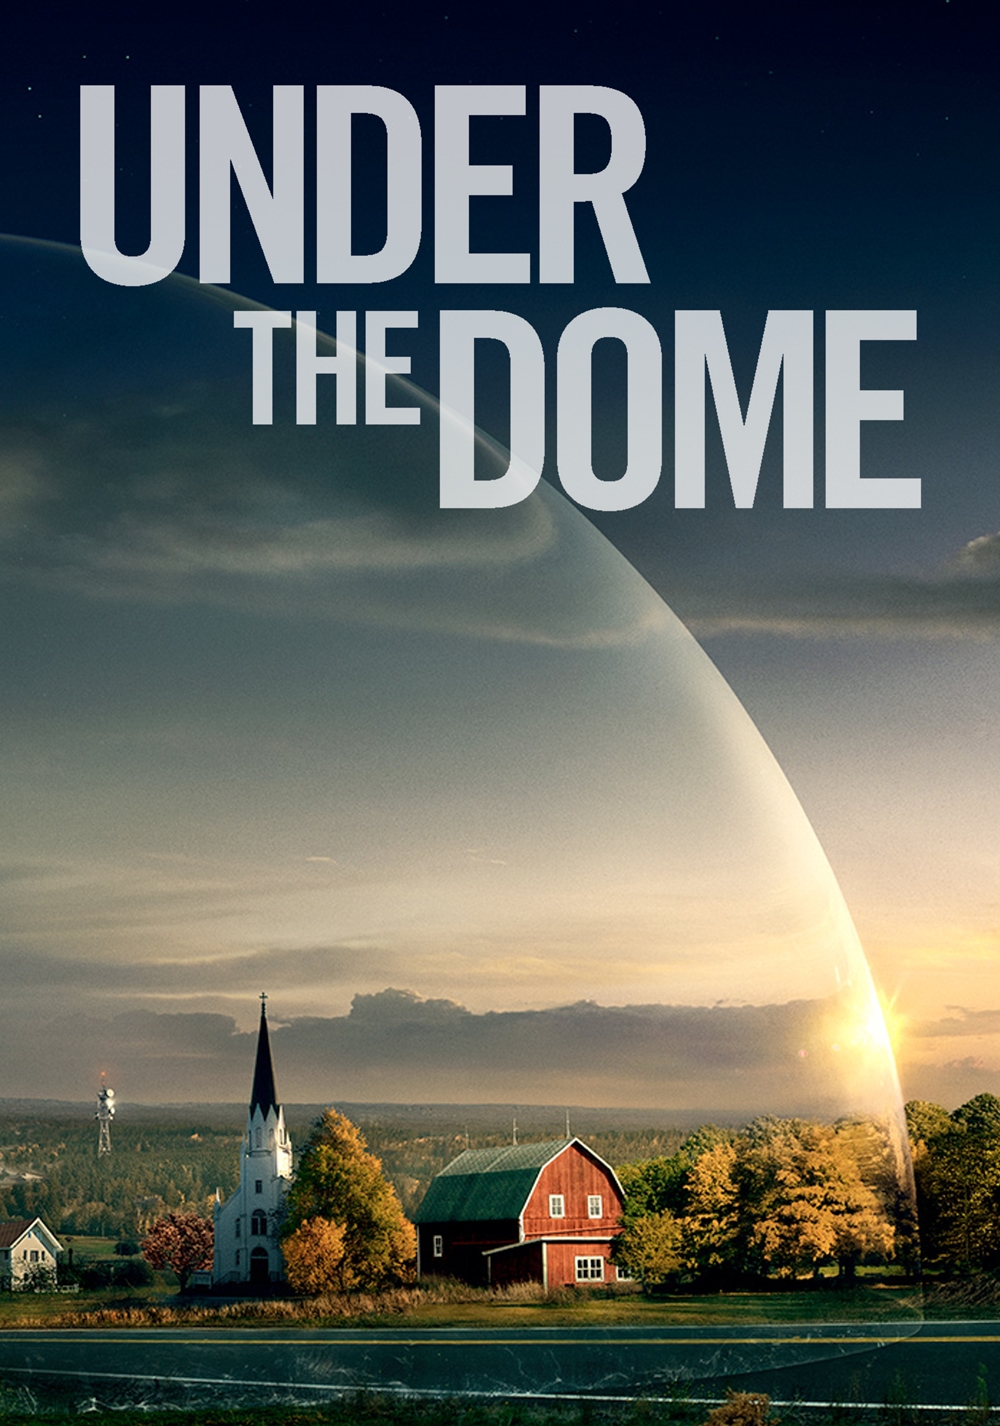 Under The Dome - Full Documentary - YouTube